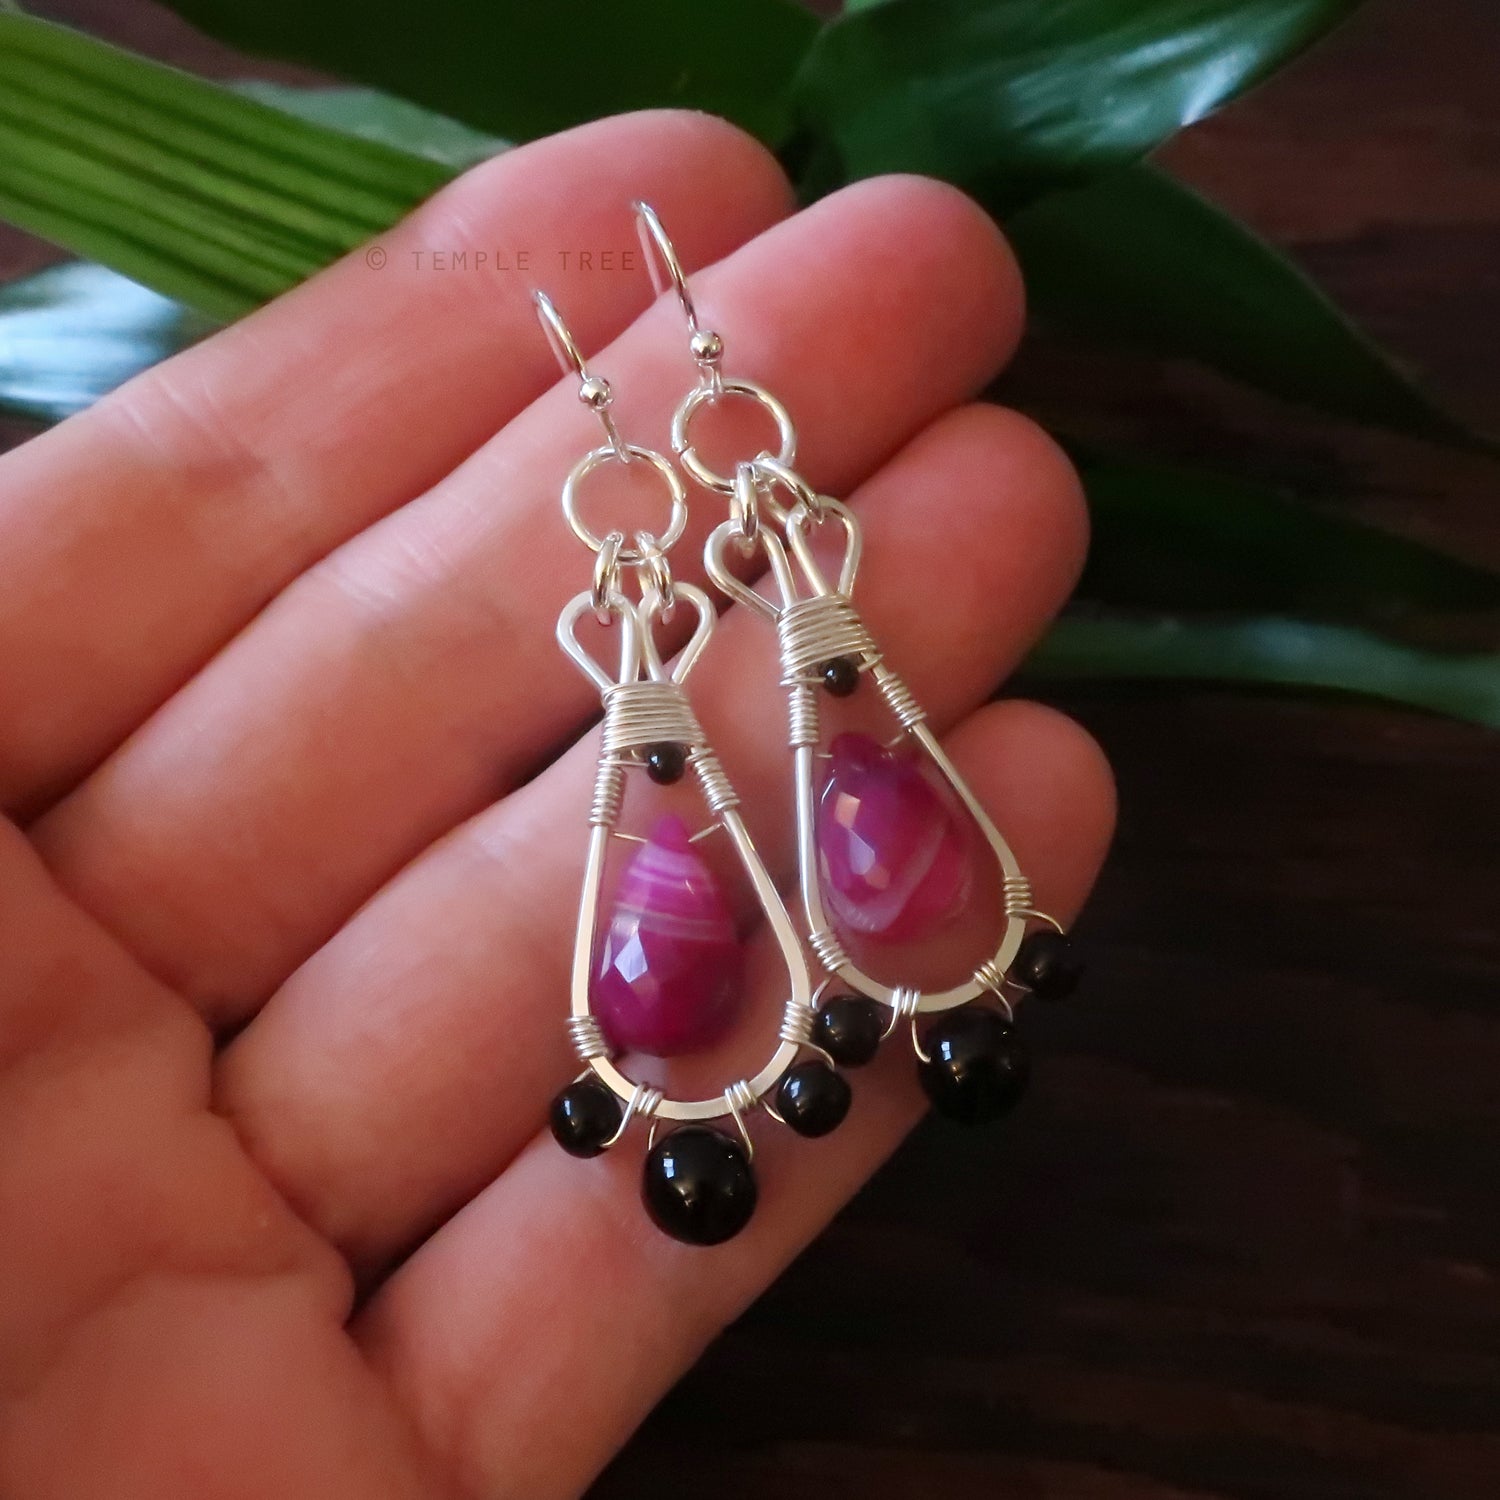 Temple Tree Silver-Plated Pendulum Dangle Earrings - Pink Banded Agate